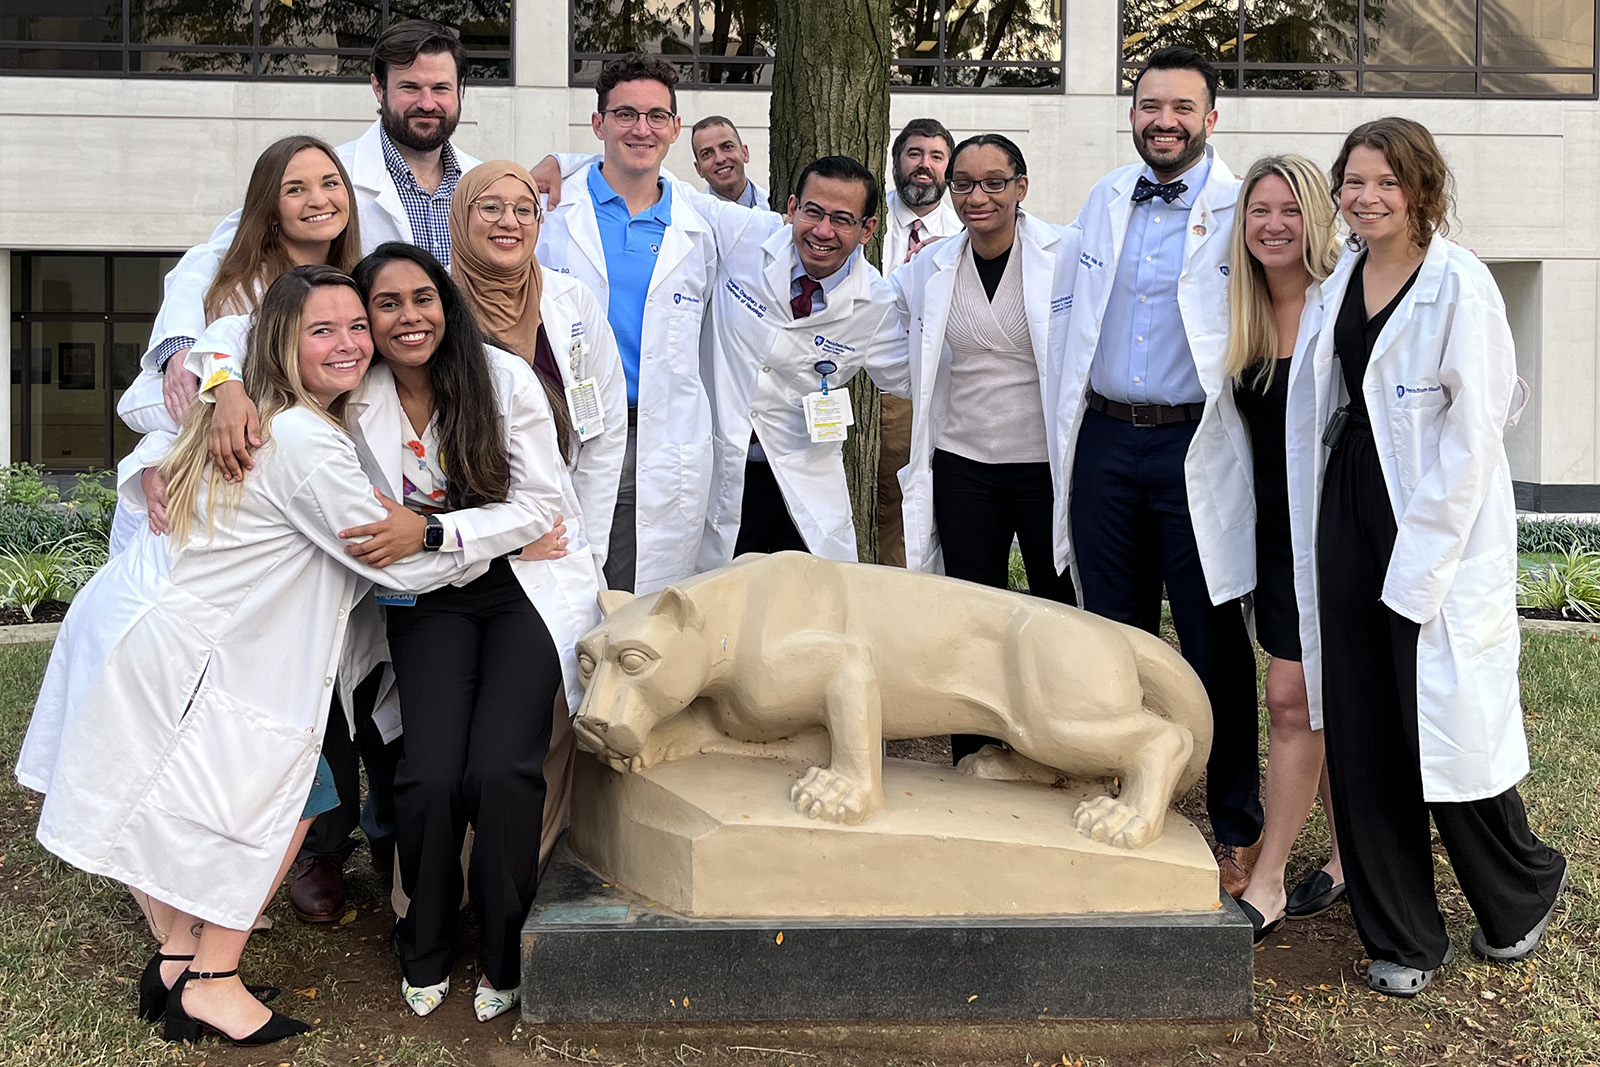 A group of 13 neurology residents, some with arms around each other and all wearing white coats, stand around a Nittany Lion statue in the Penn State College of Medicine courtyard.